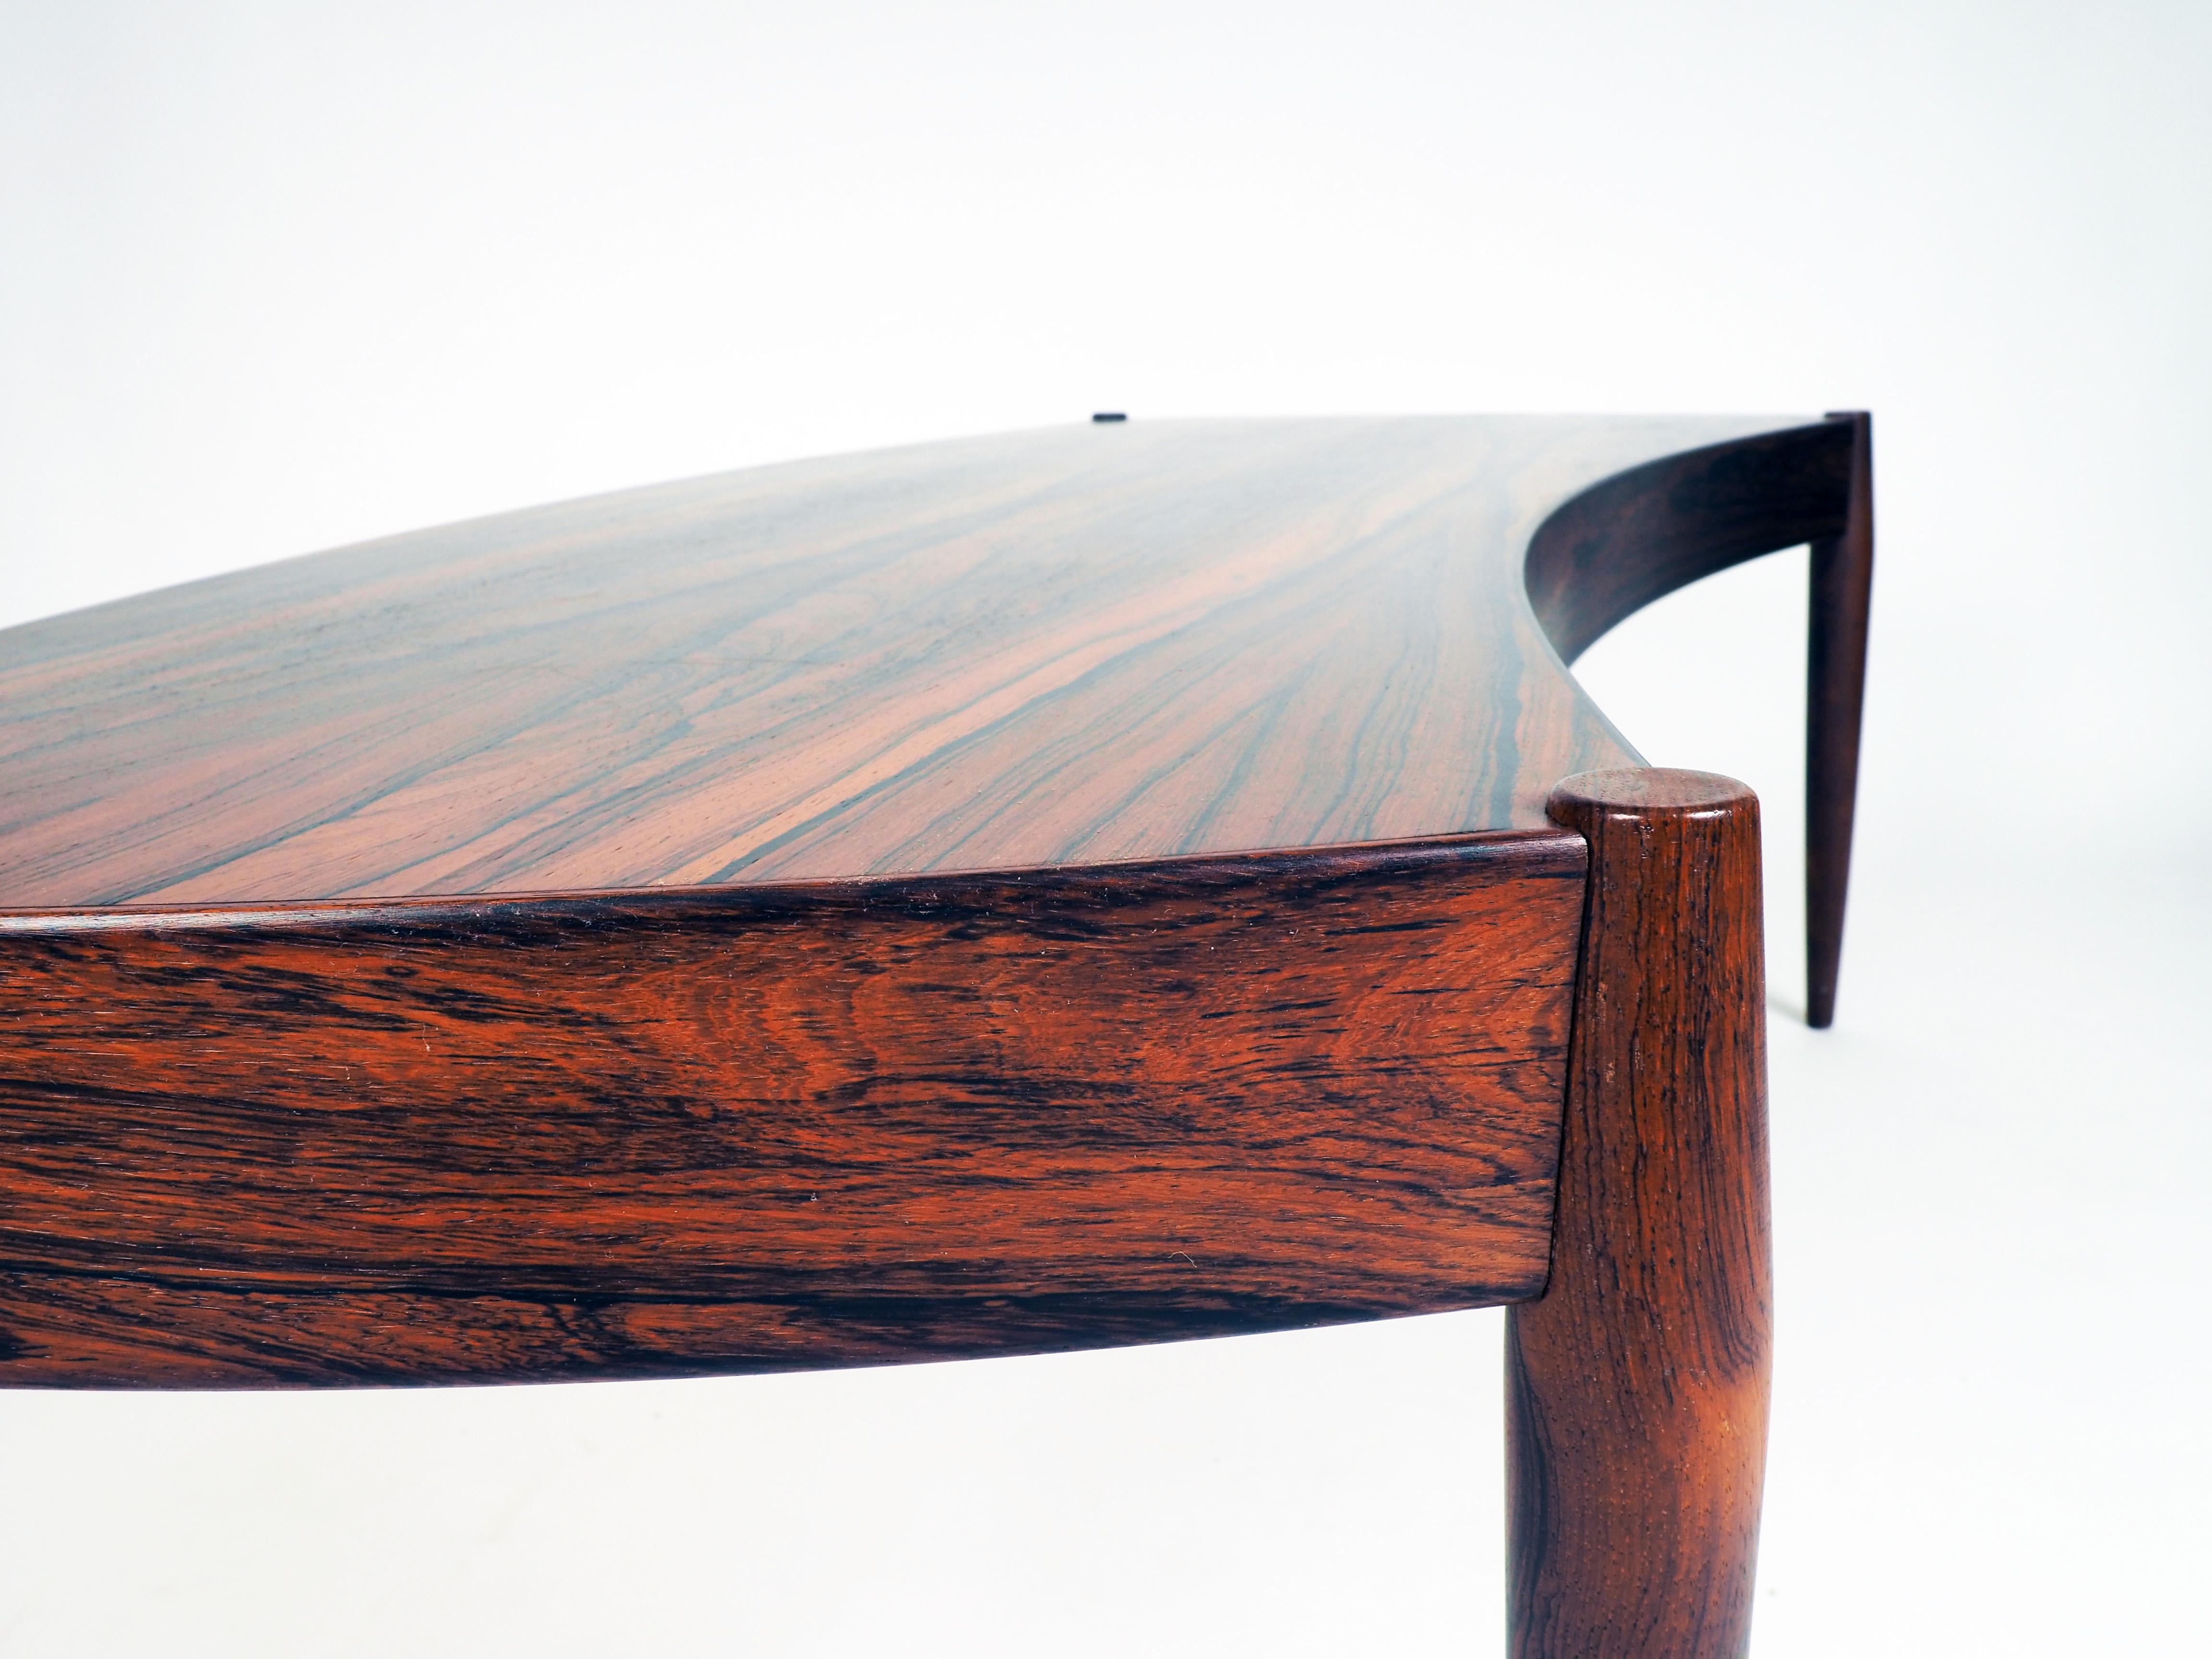 Coffee table in bent shape. Made in rosewood by Trensum, Sweden. The table was designed by the Danish architect Johannes Andersen.